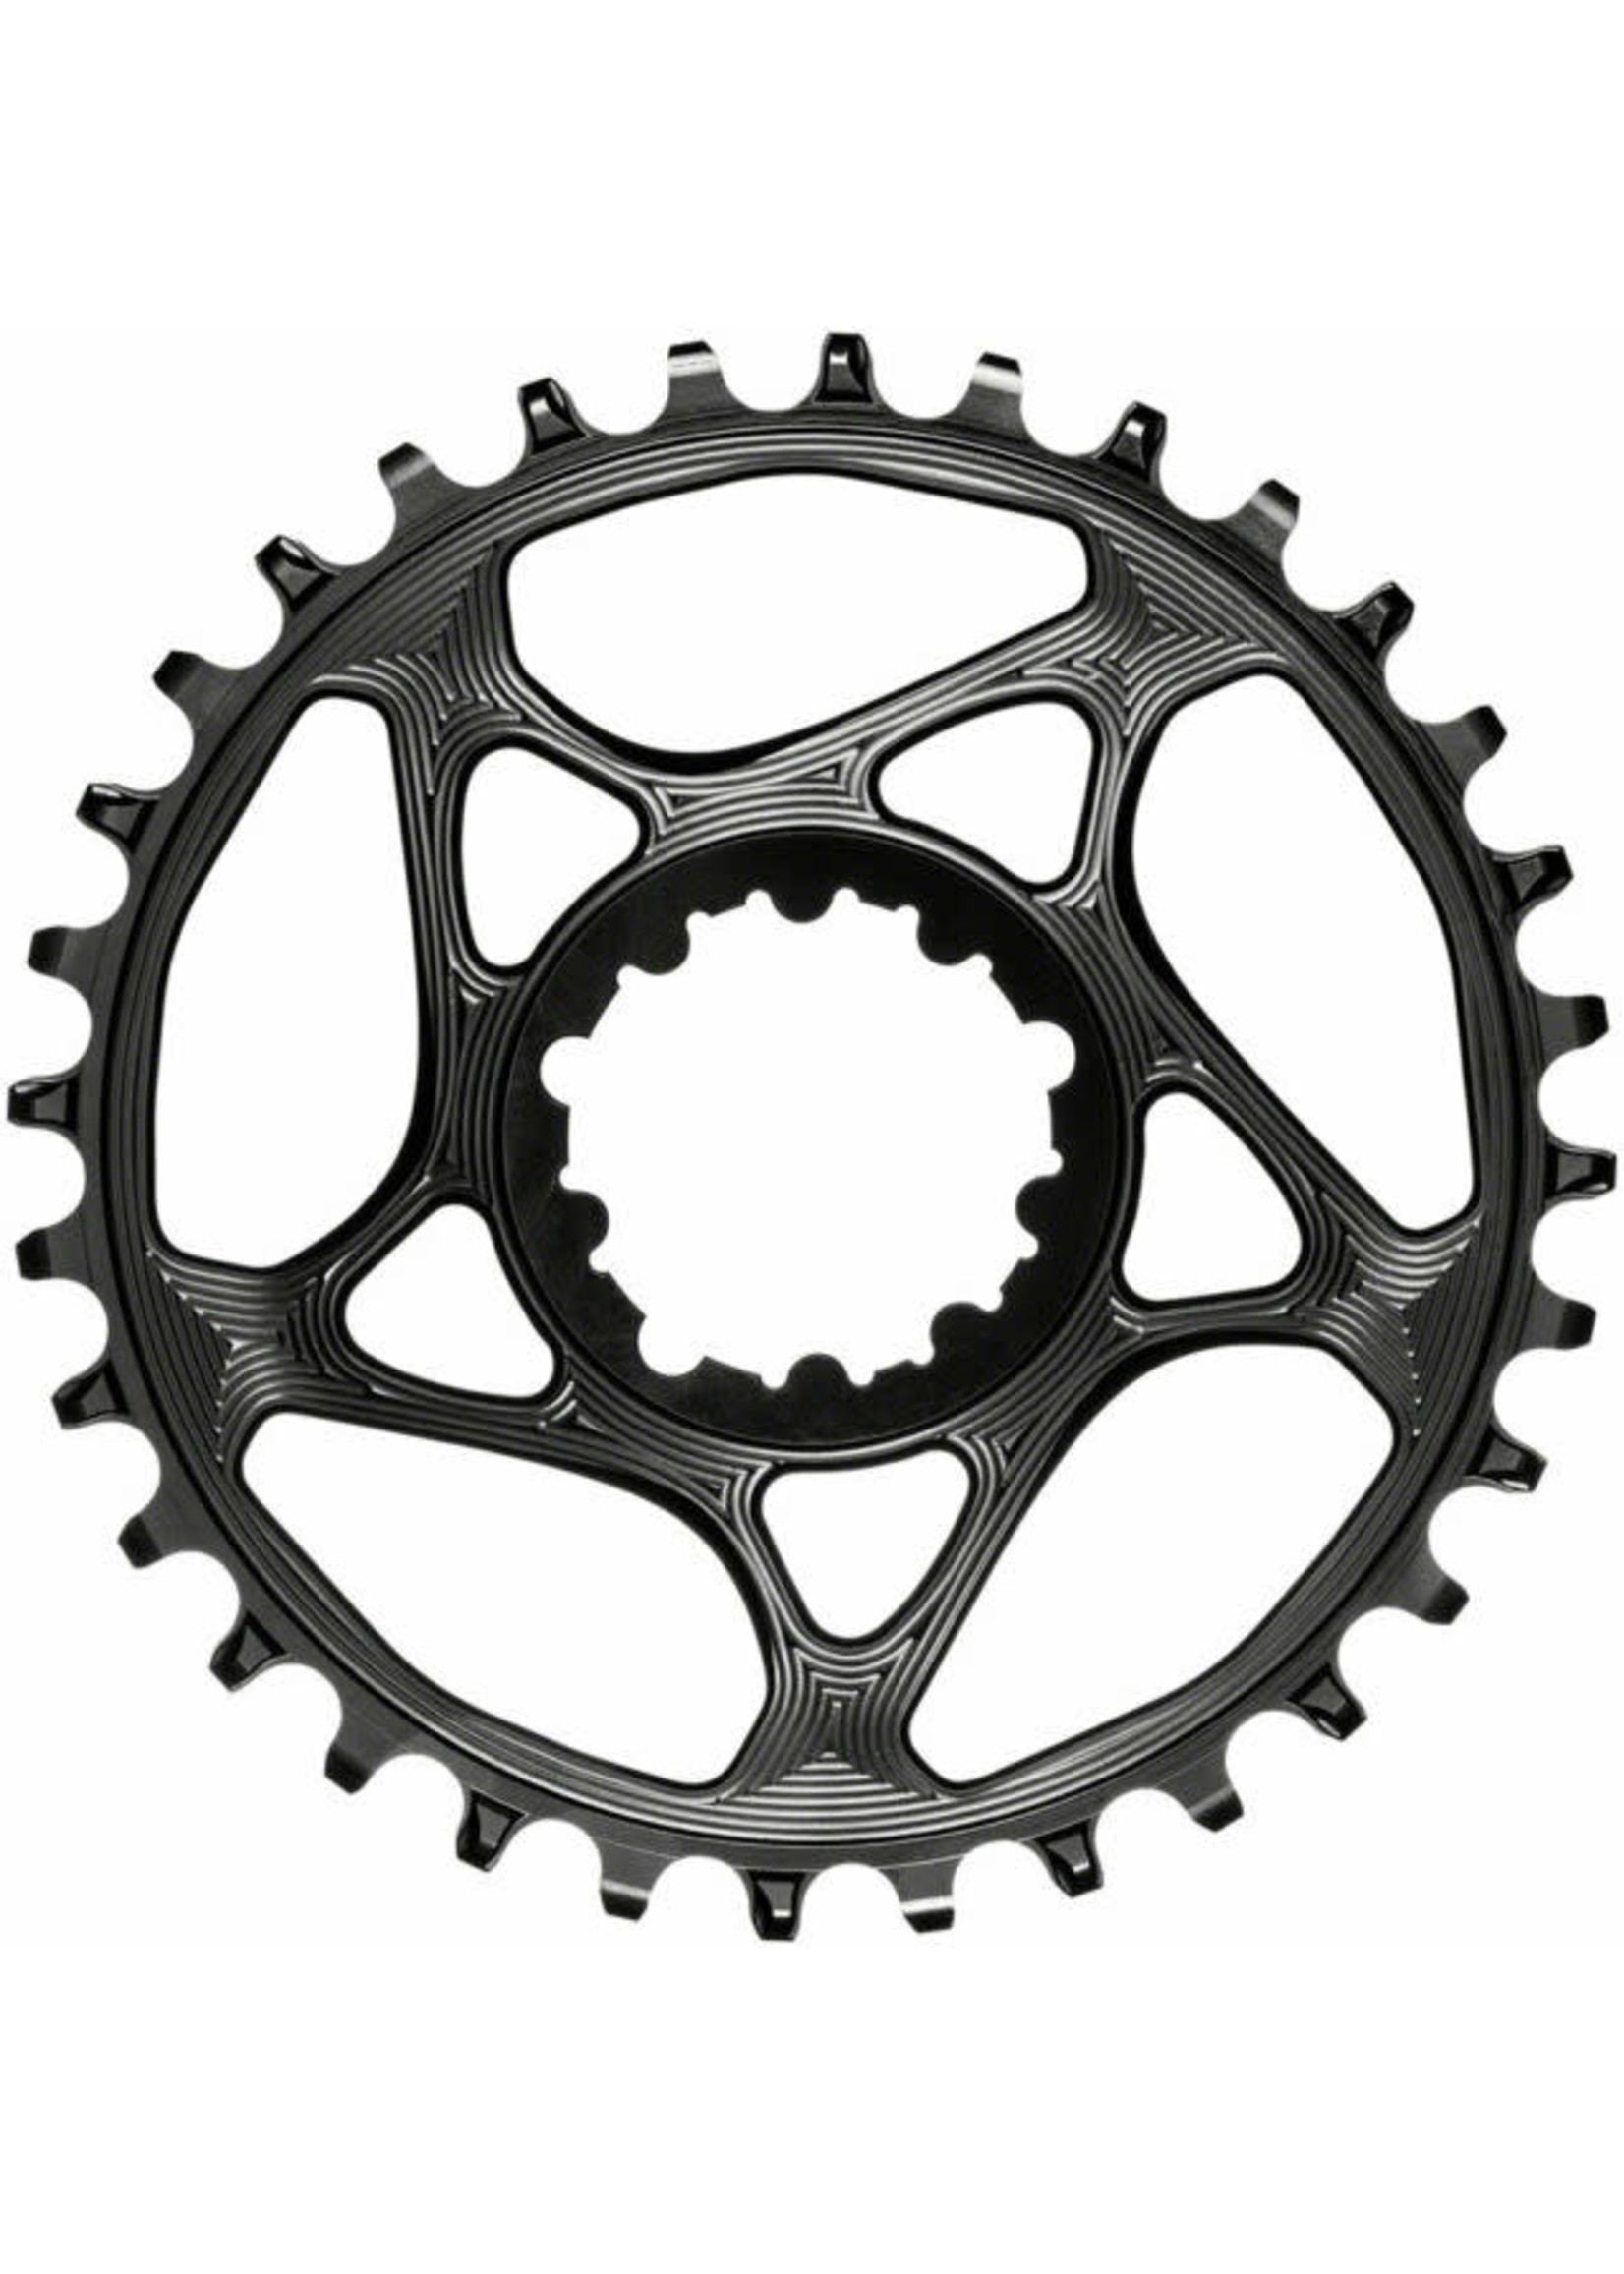 Absolute Black AbsoluteBlack Round N/W Chainring Direct Mount BB30 30T Black